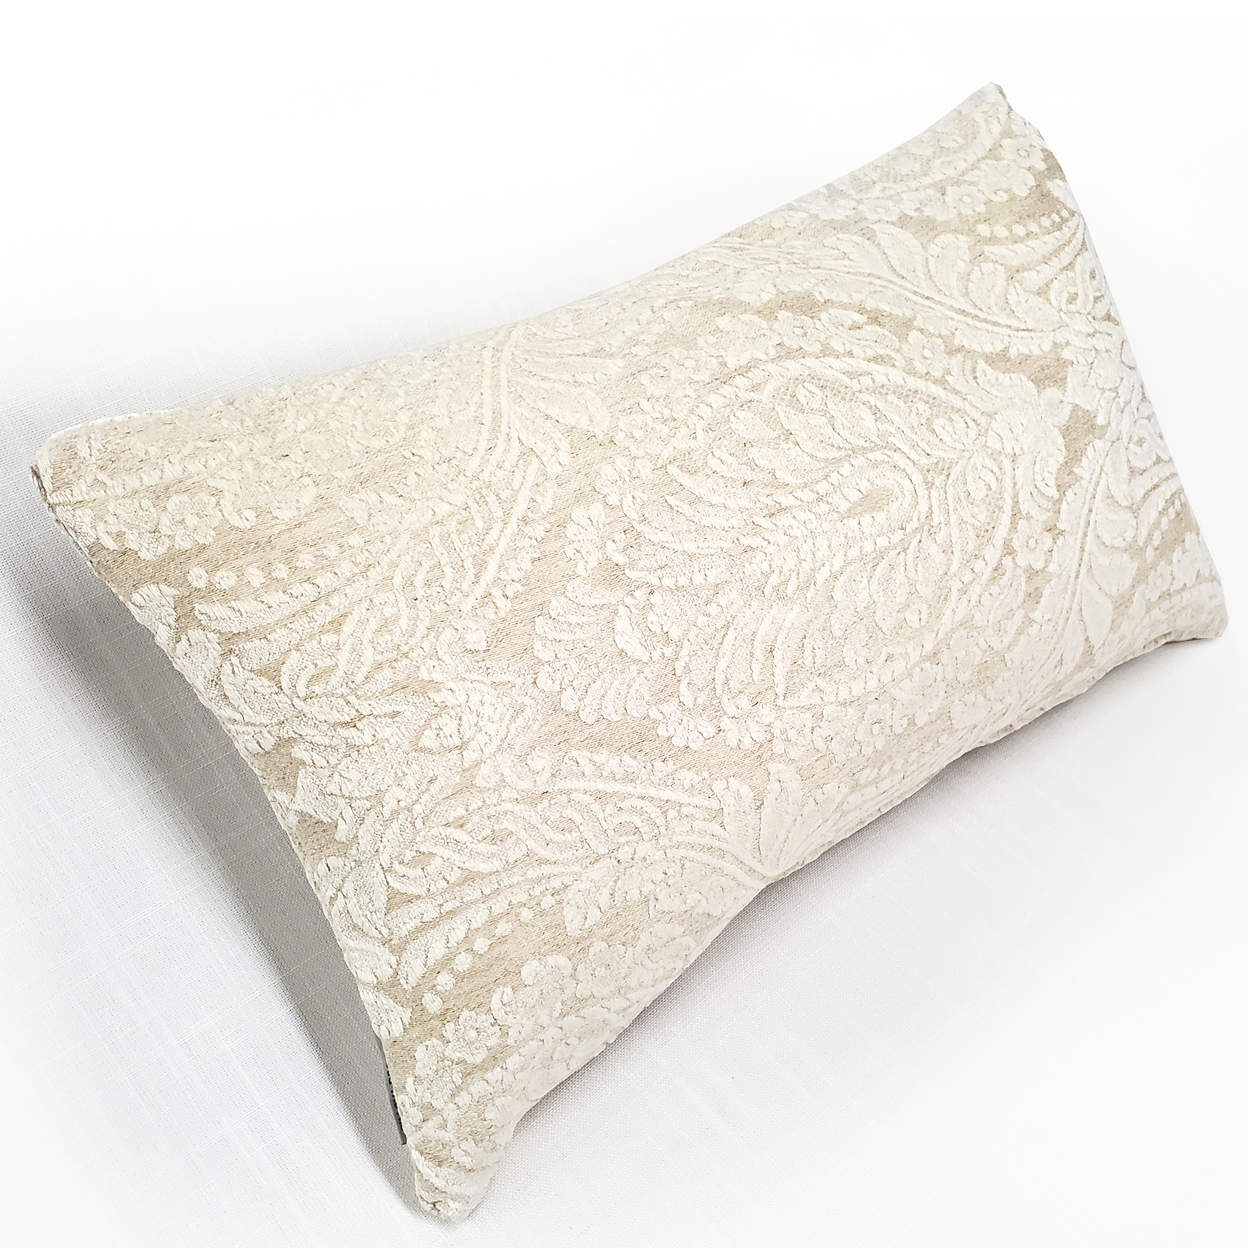 Jacquard Damask In Cream Throw Pillow 12x19, With Polyfill Insert